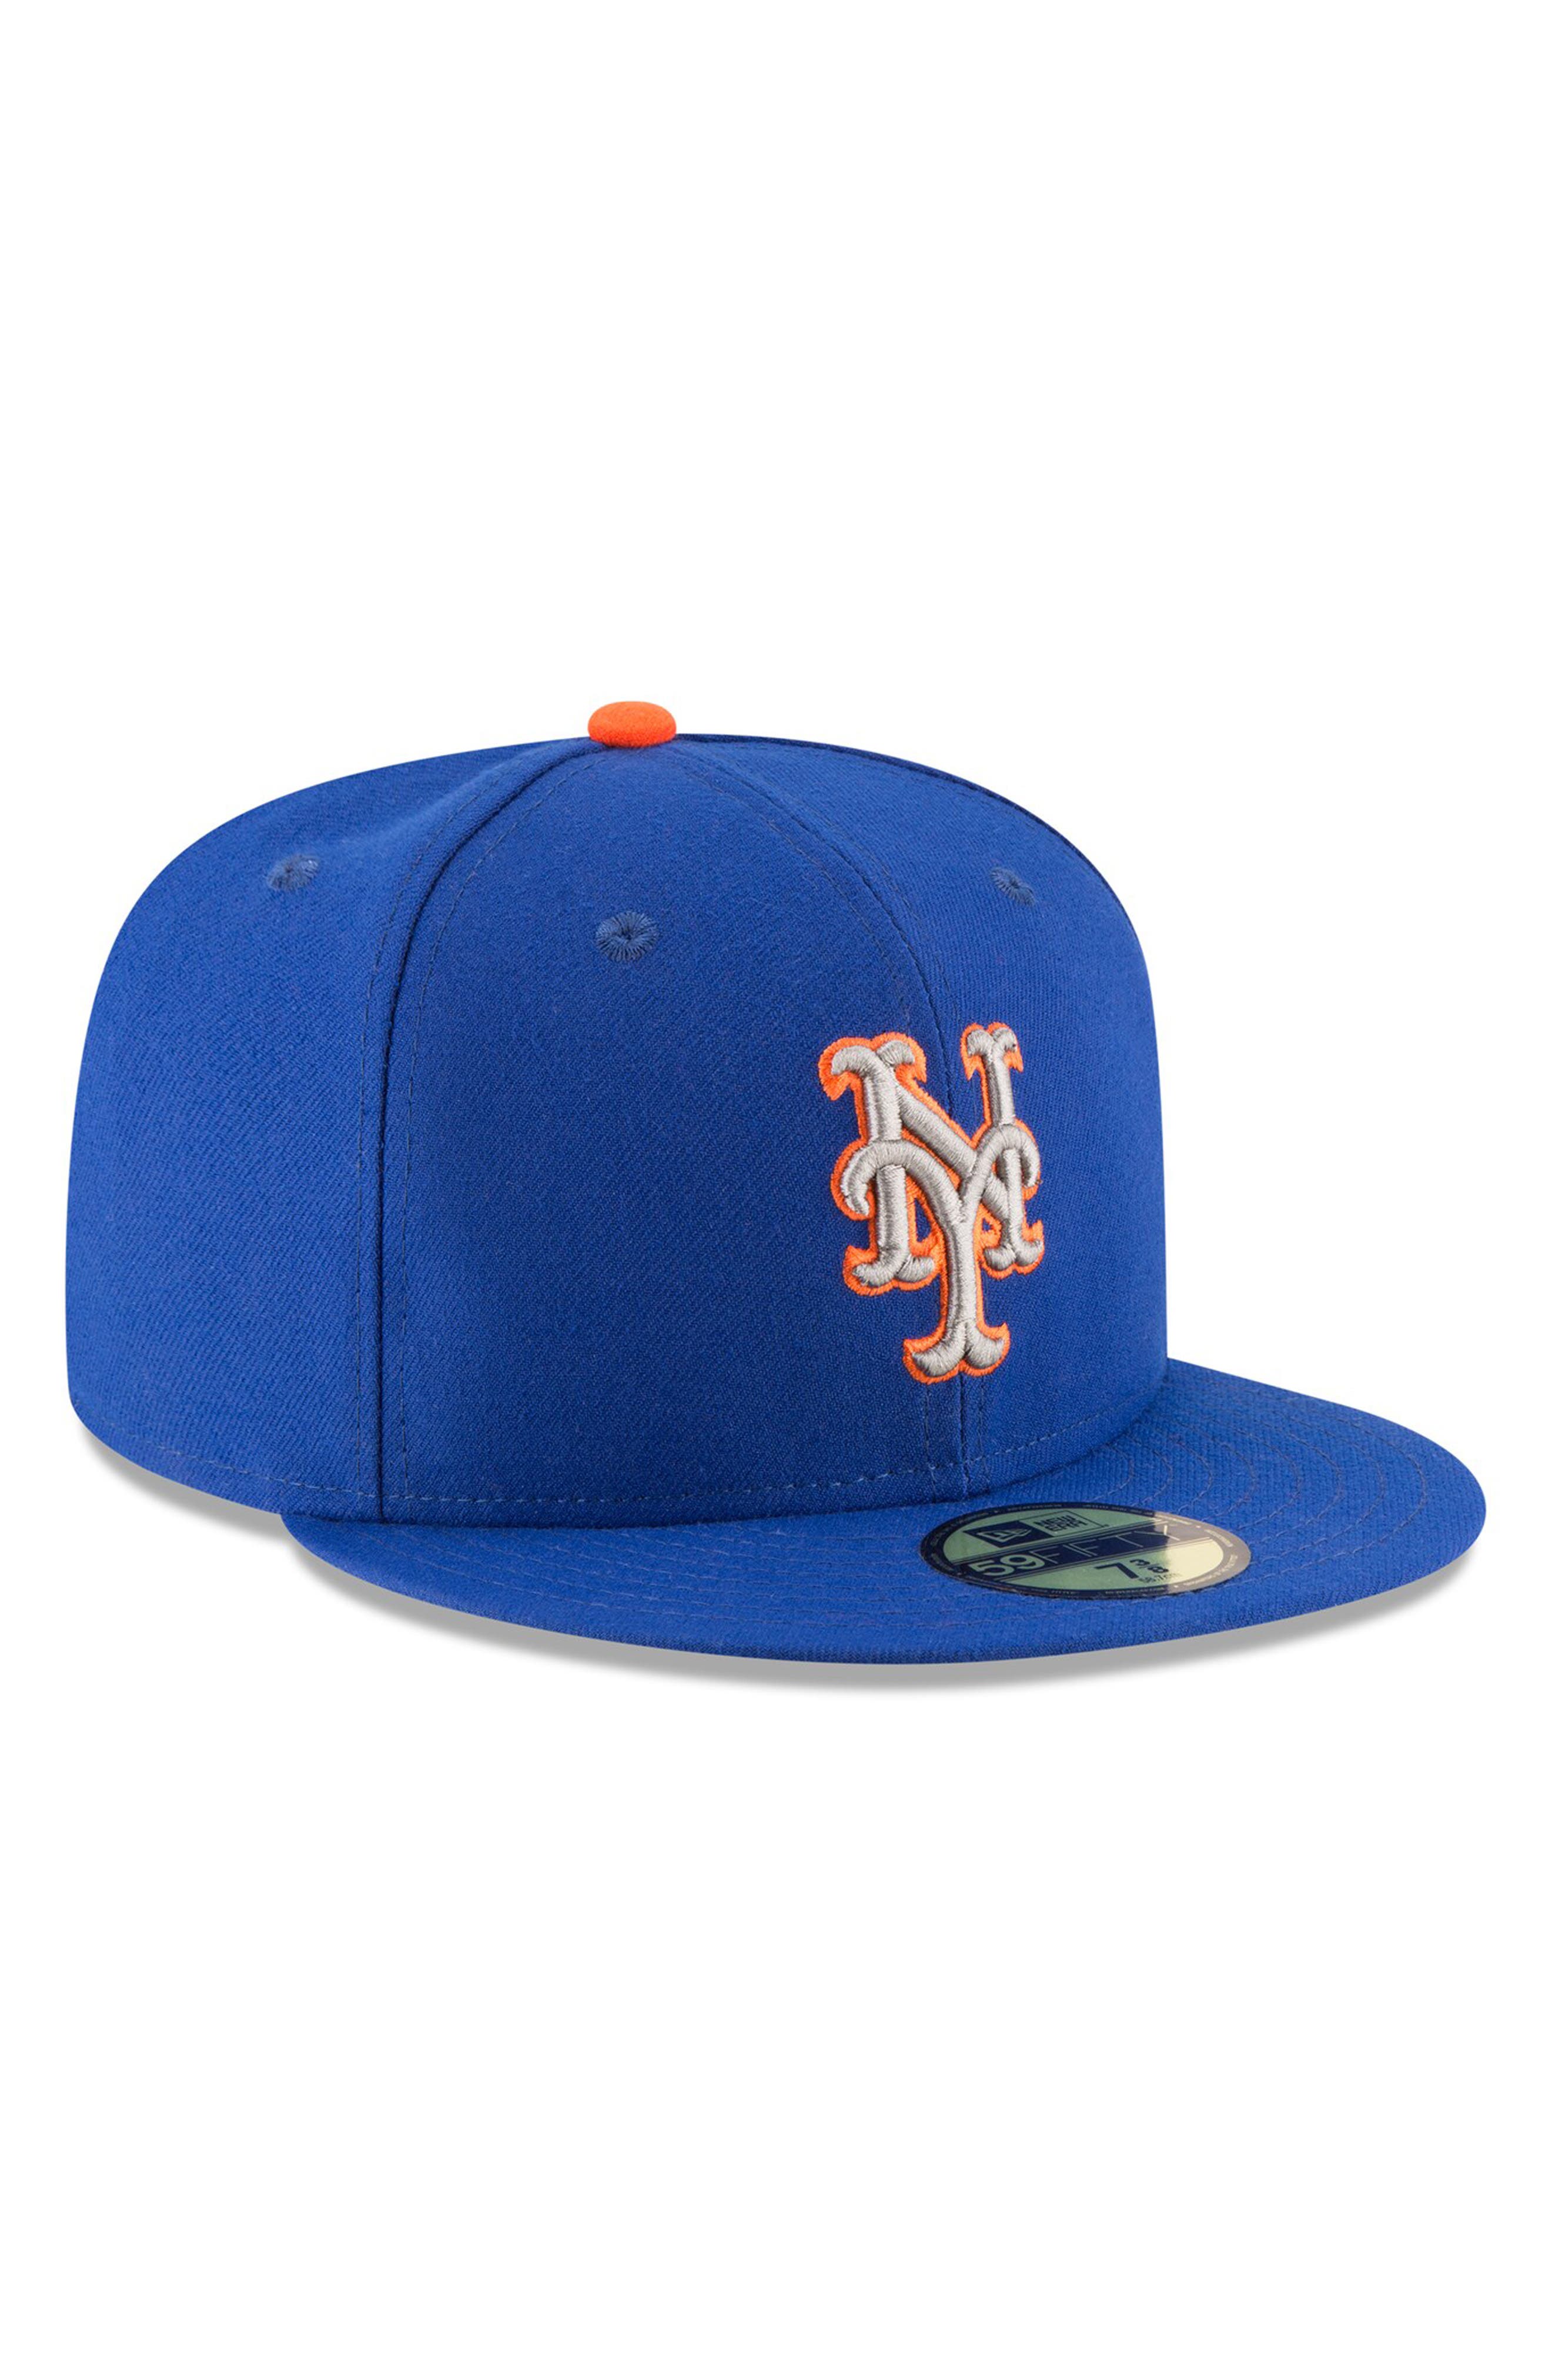 7 1/8 New era 59 fifty Cap-authentic new york mets Royal